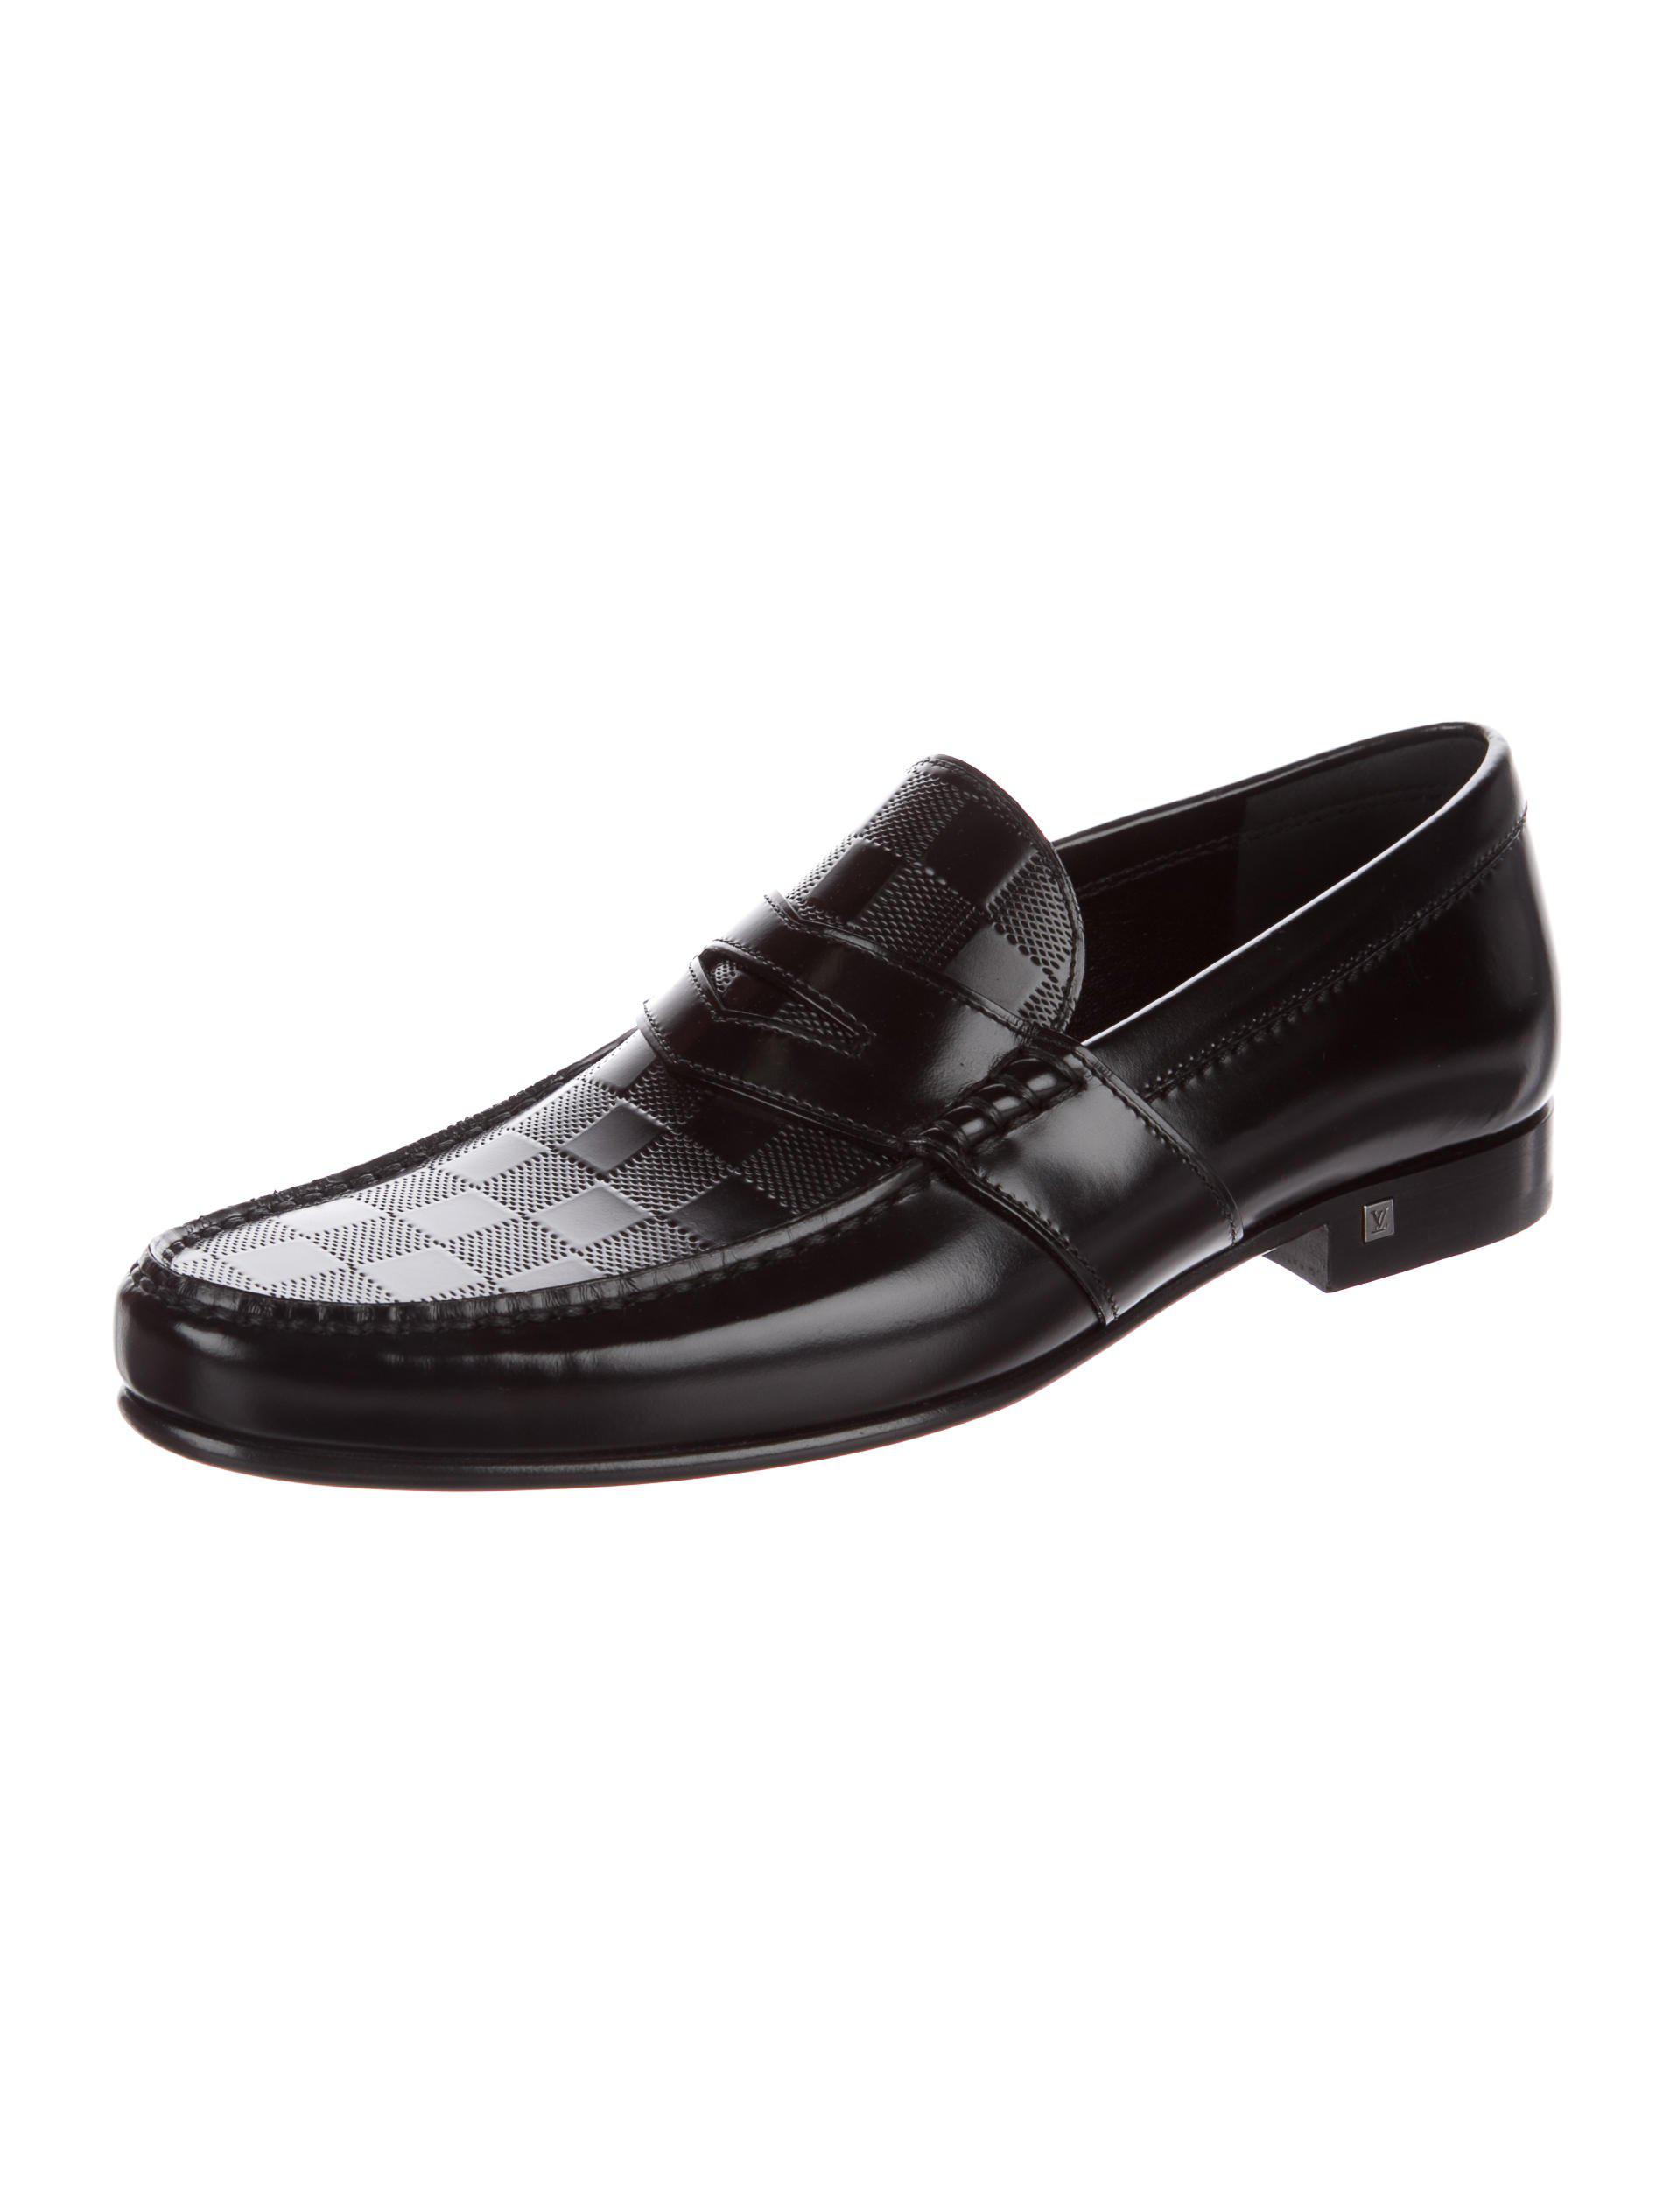 Lyst - Louis Vuitton Damier Penny Loafers W/ Tags in Black for Men